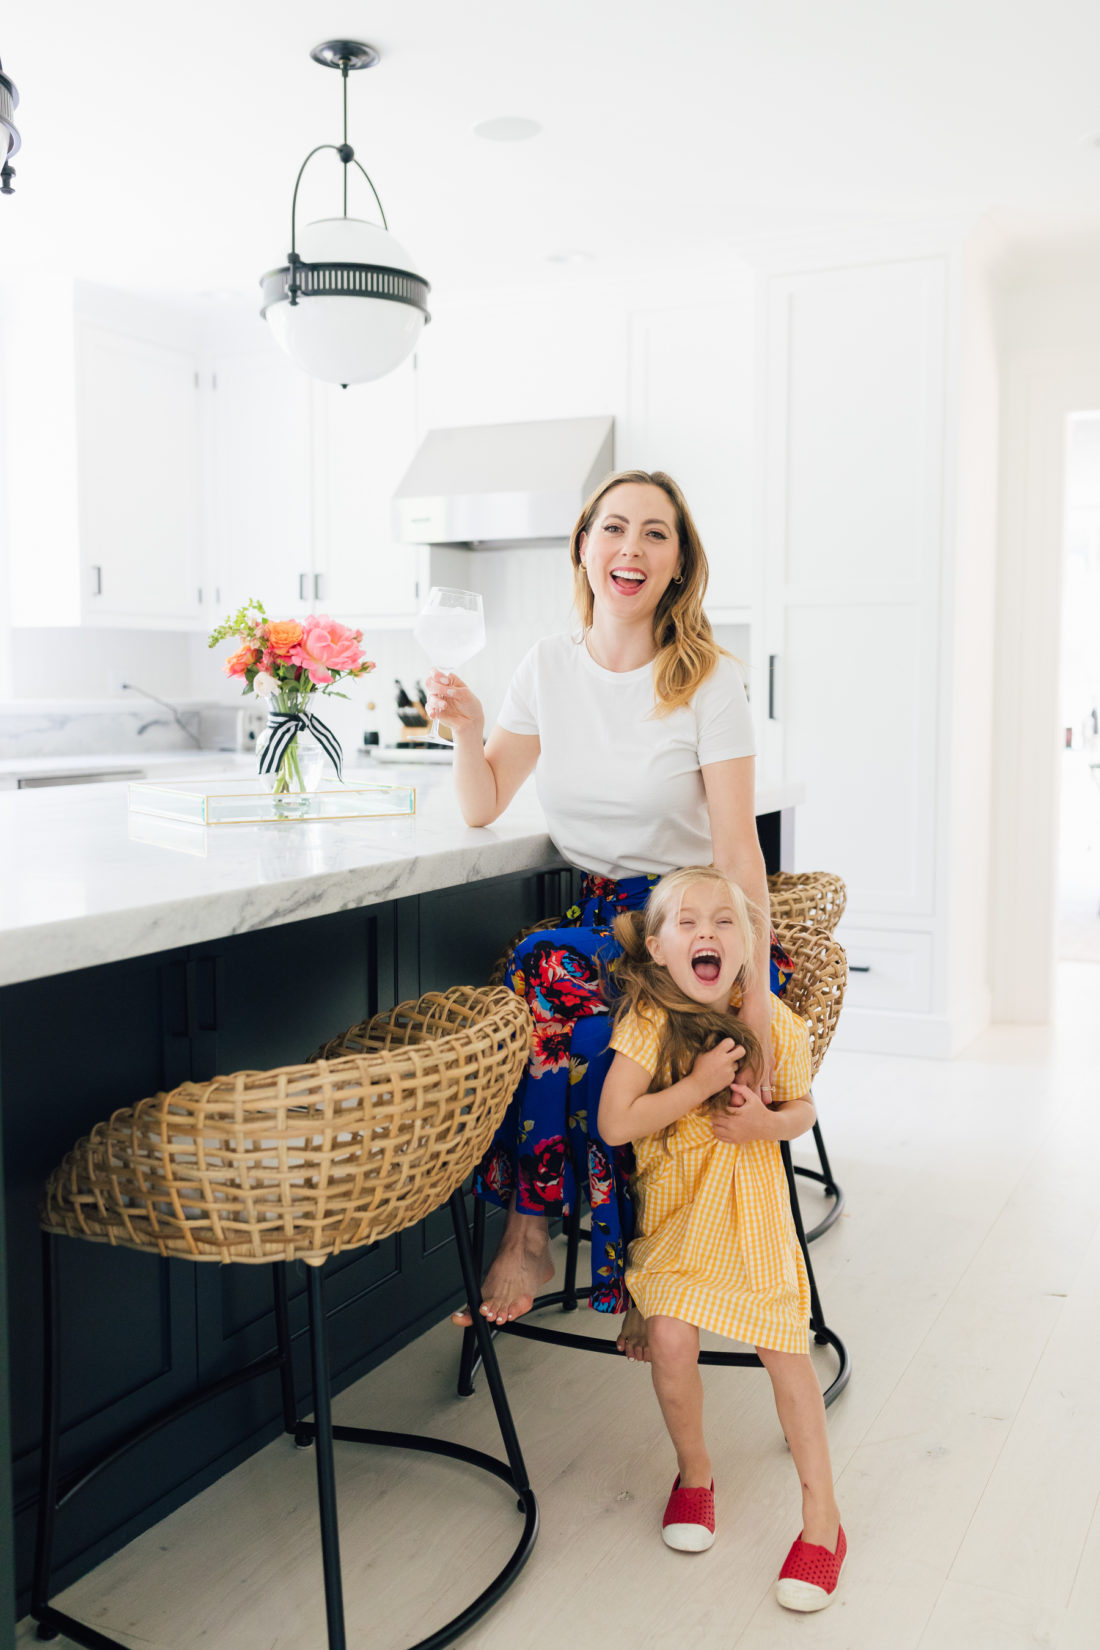 Eva Amurri Martino wears a crisp white t-shirt and a colorful skirt with her daughter Marlowe in her kitchen in Connecticut